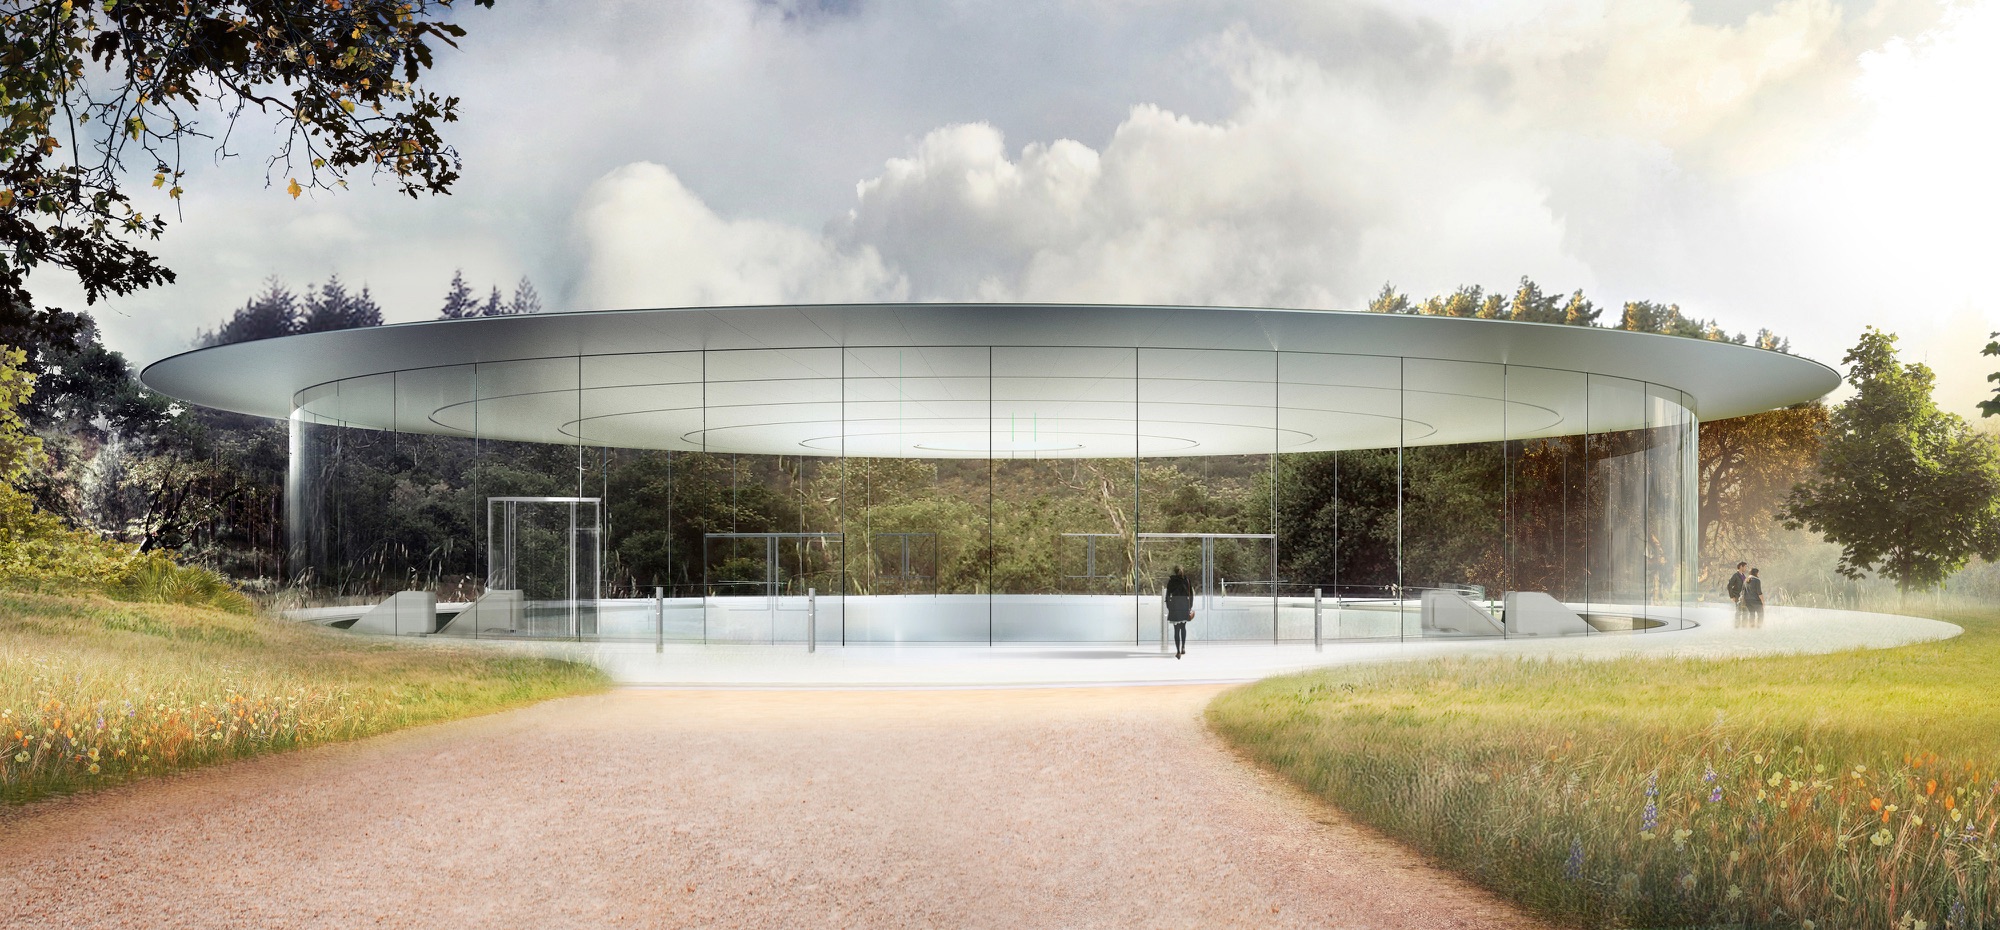 Apple Campus 2 to be Named 'Apple Park' - Opens in April